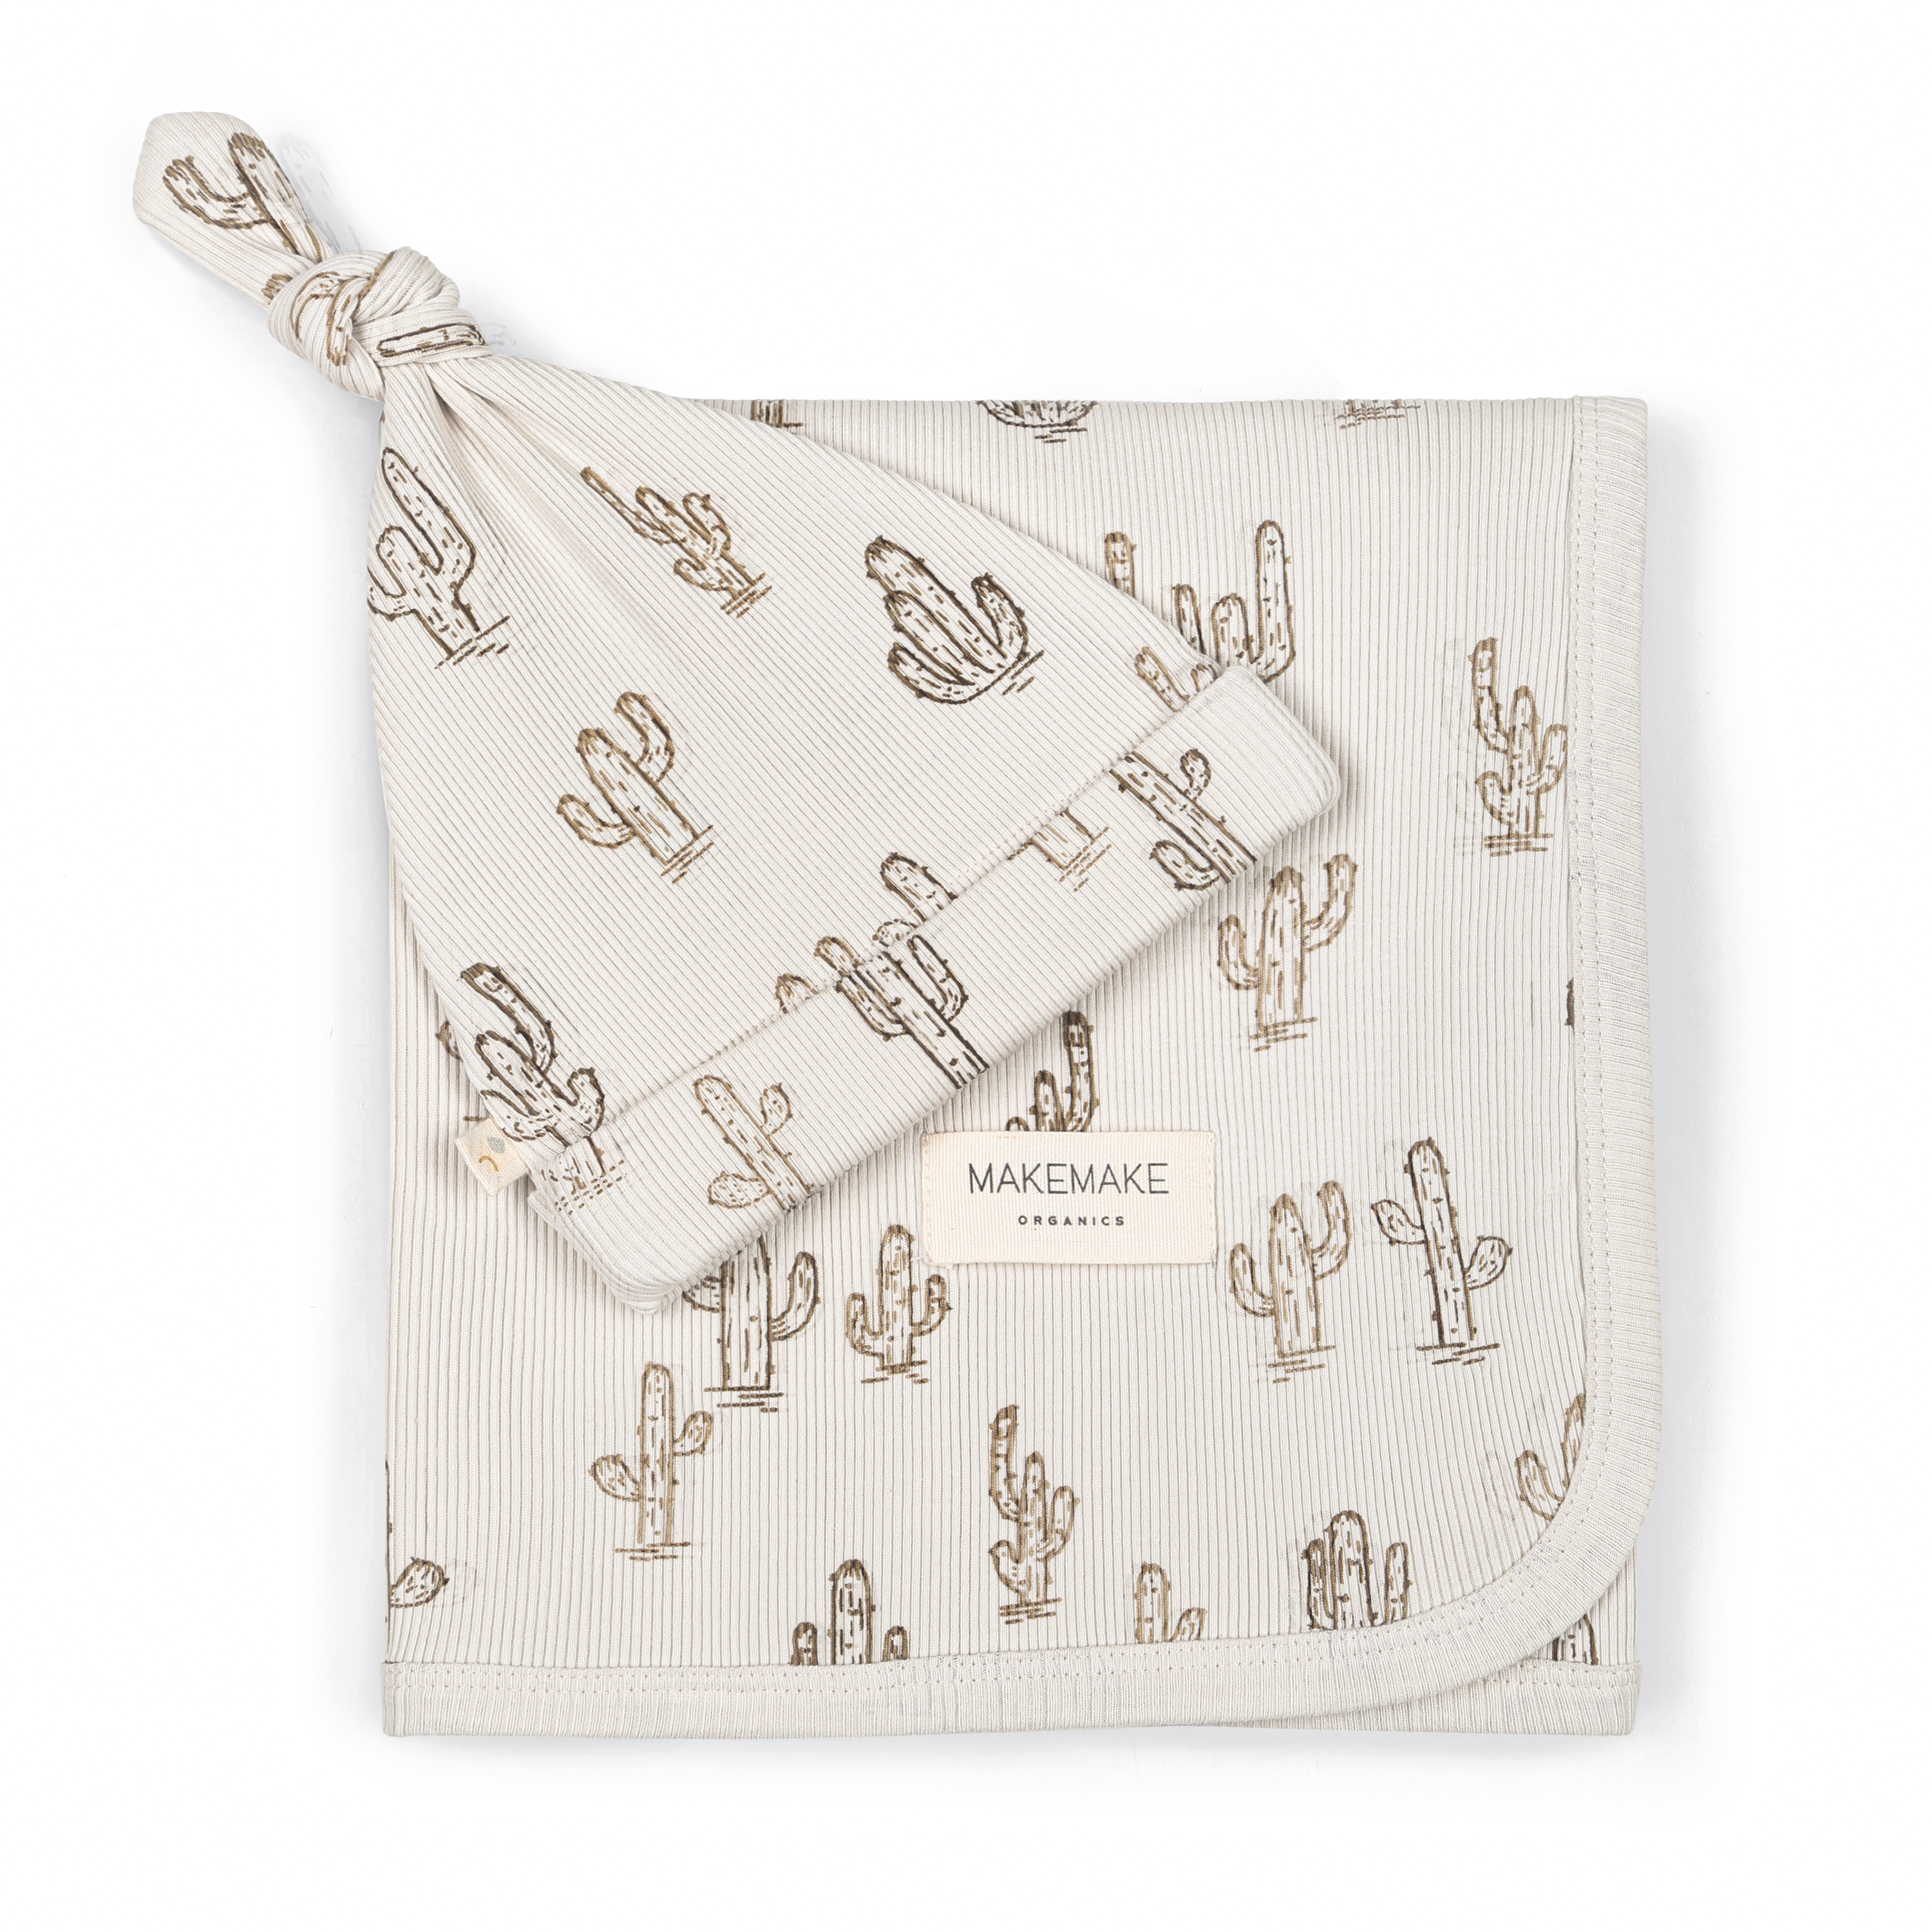 A beige Organic Swaddle Blanket & Hat with a cactus print and a corner tied into a knot, labeled "Makemake Organics." the fabric texture is soft and finely woven.